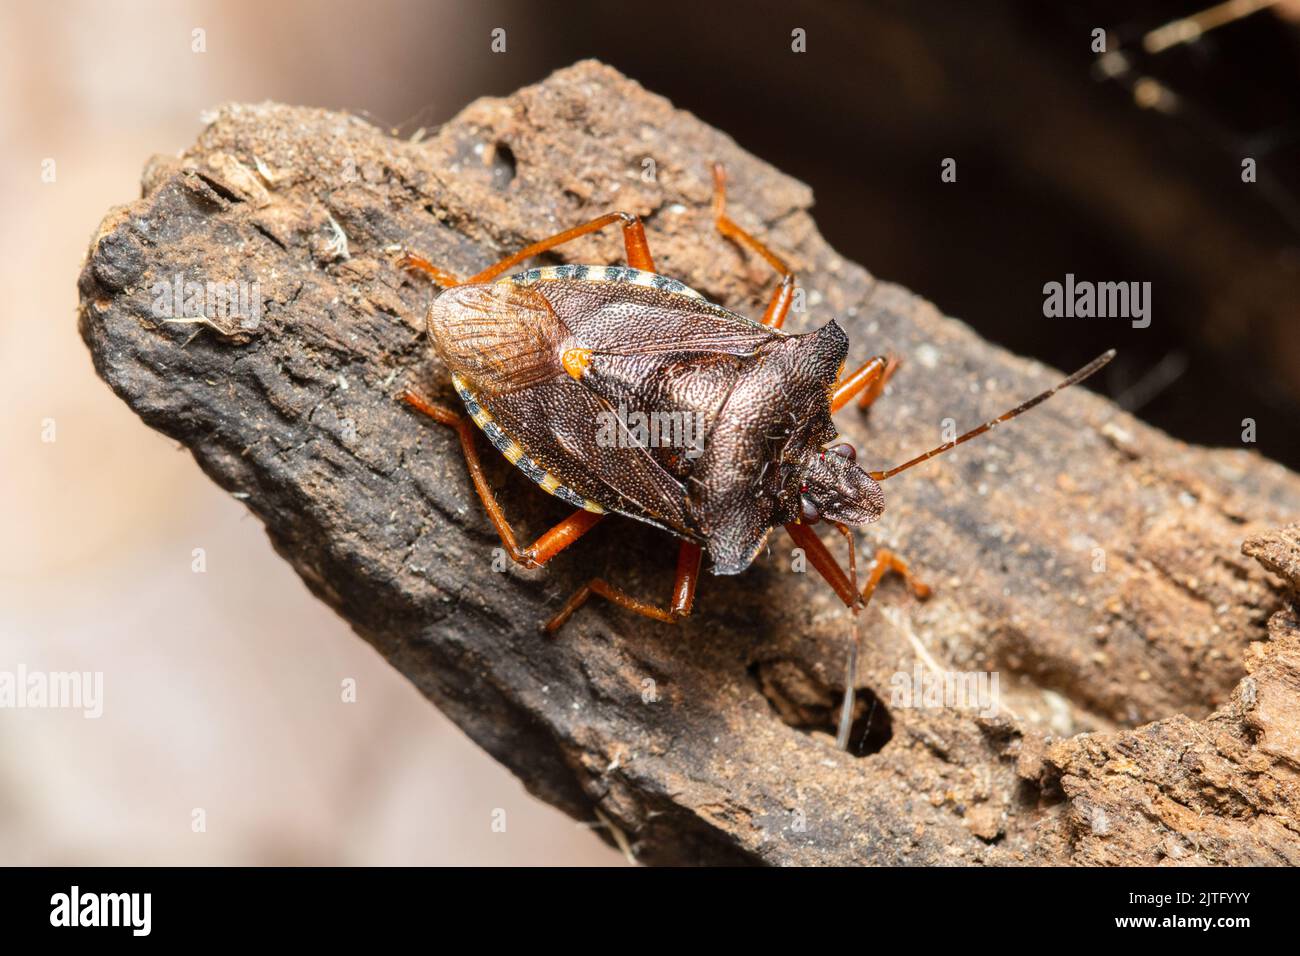 A forest bug also known as red-legged shieldbug, Pentatoma rufipes, perched on a rotten log. Stock Photo